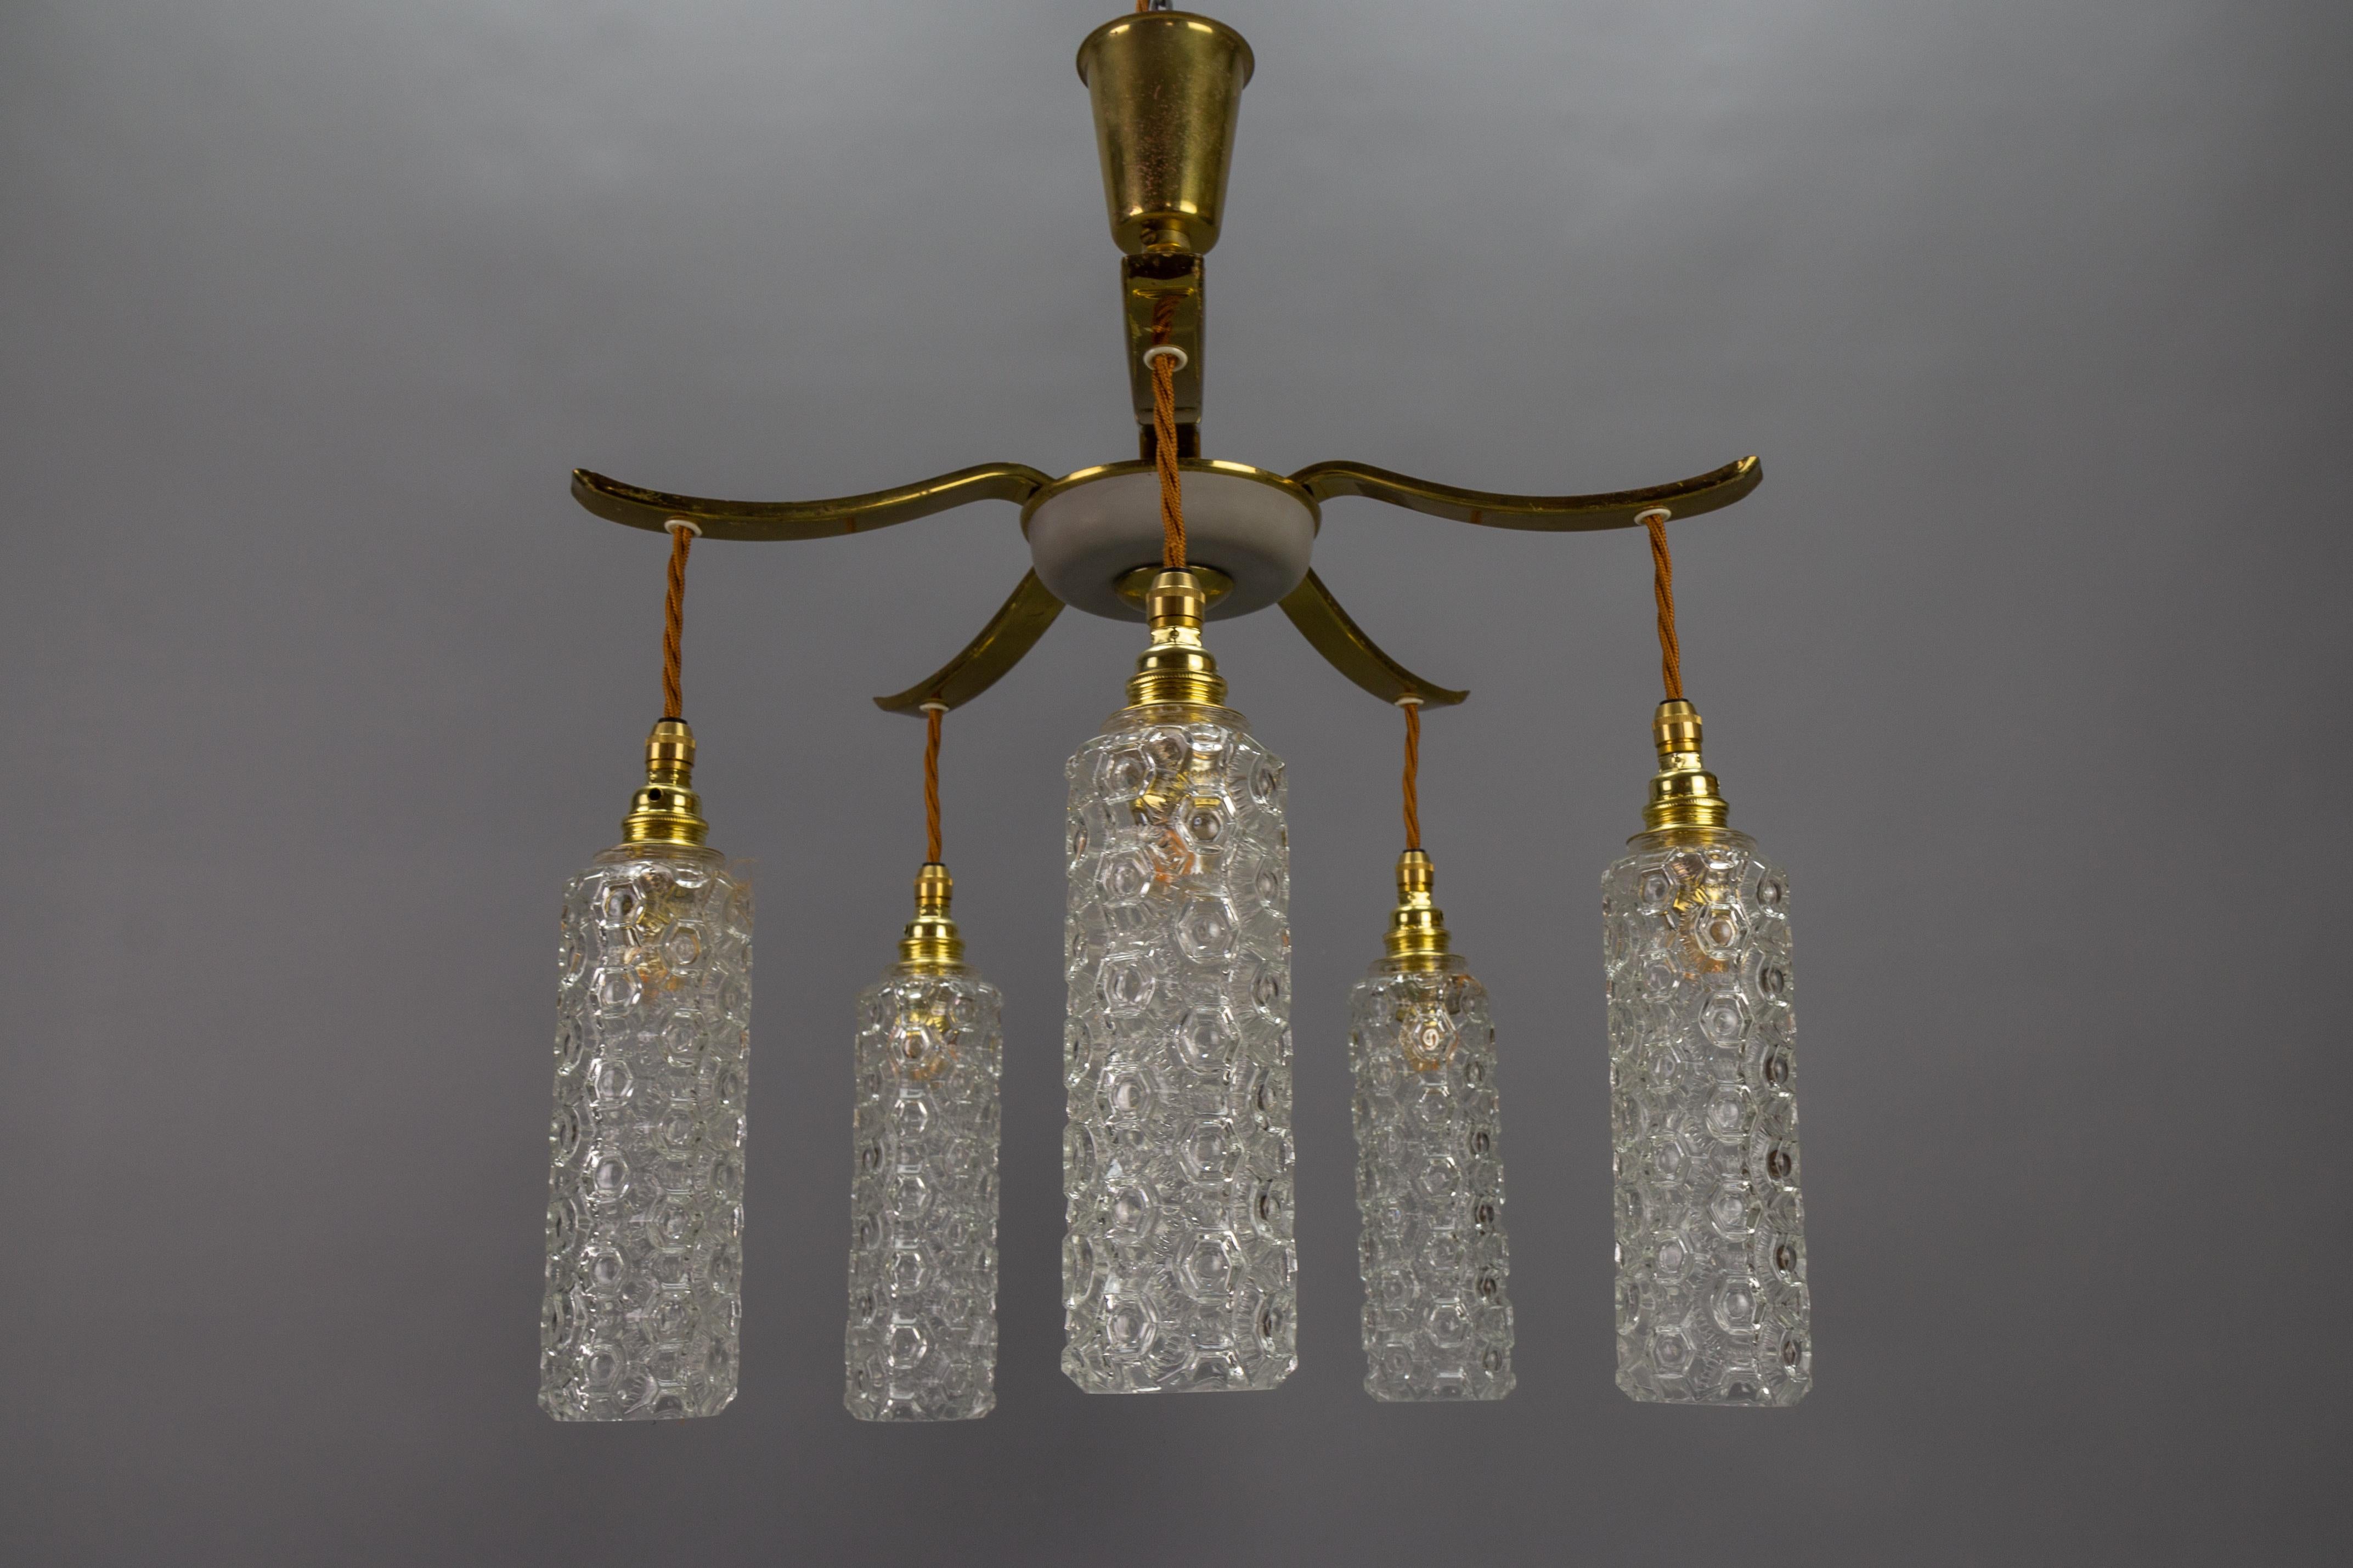 Mid-Century Modern metal and clear glass five-light pendant chandelier, Germany, circa the 1950s.
This adorable vintage pendant chandelier features a brass- and cream-colored metal frame with five arms, each with a clear glass cylinder-shaped